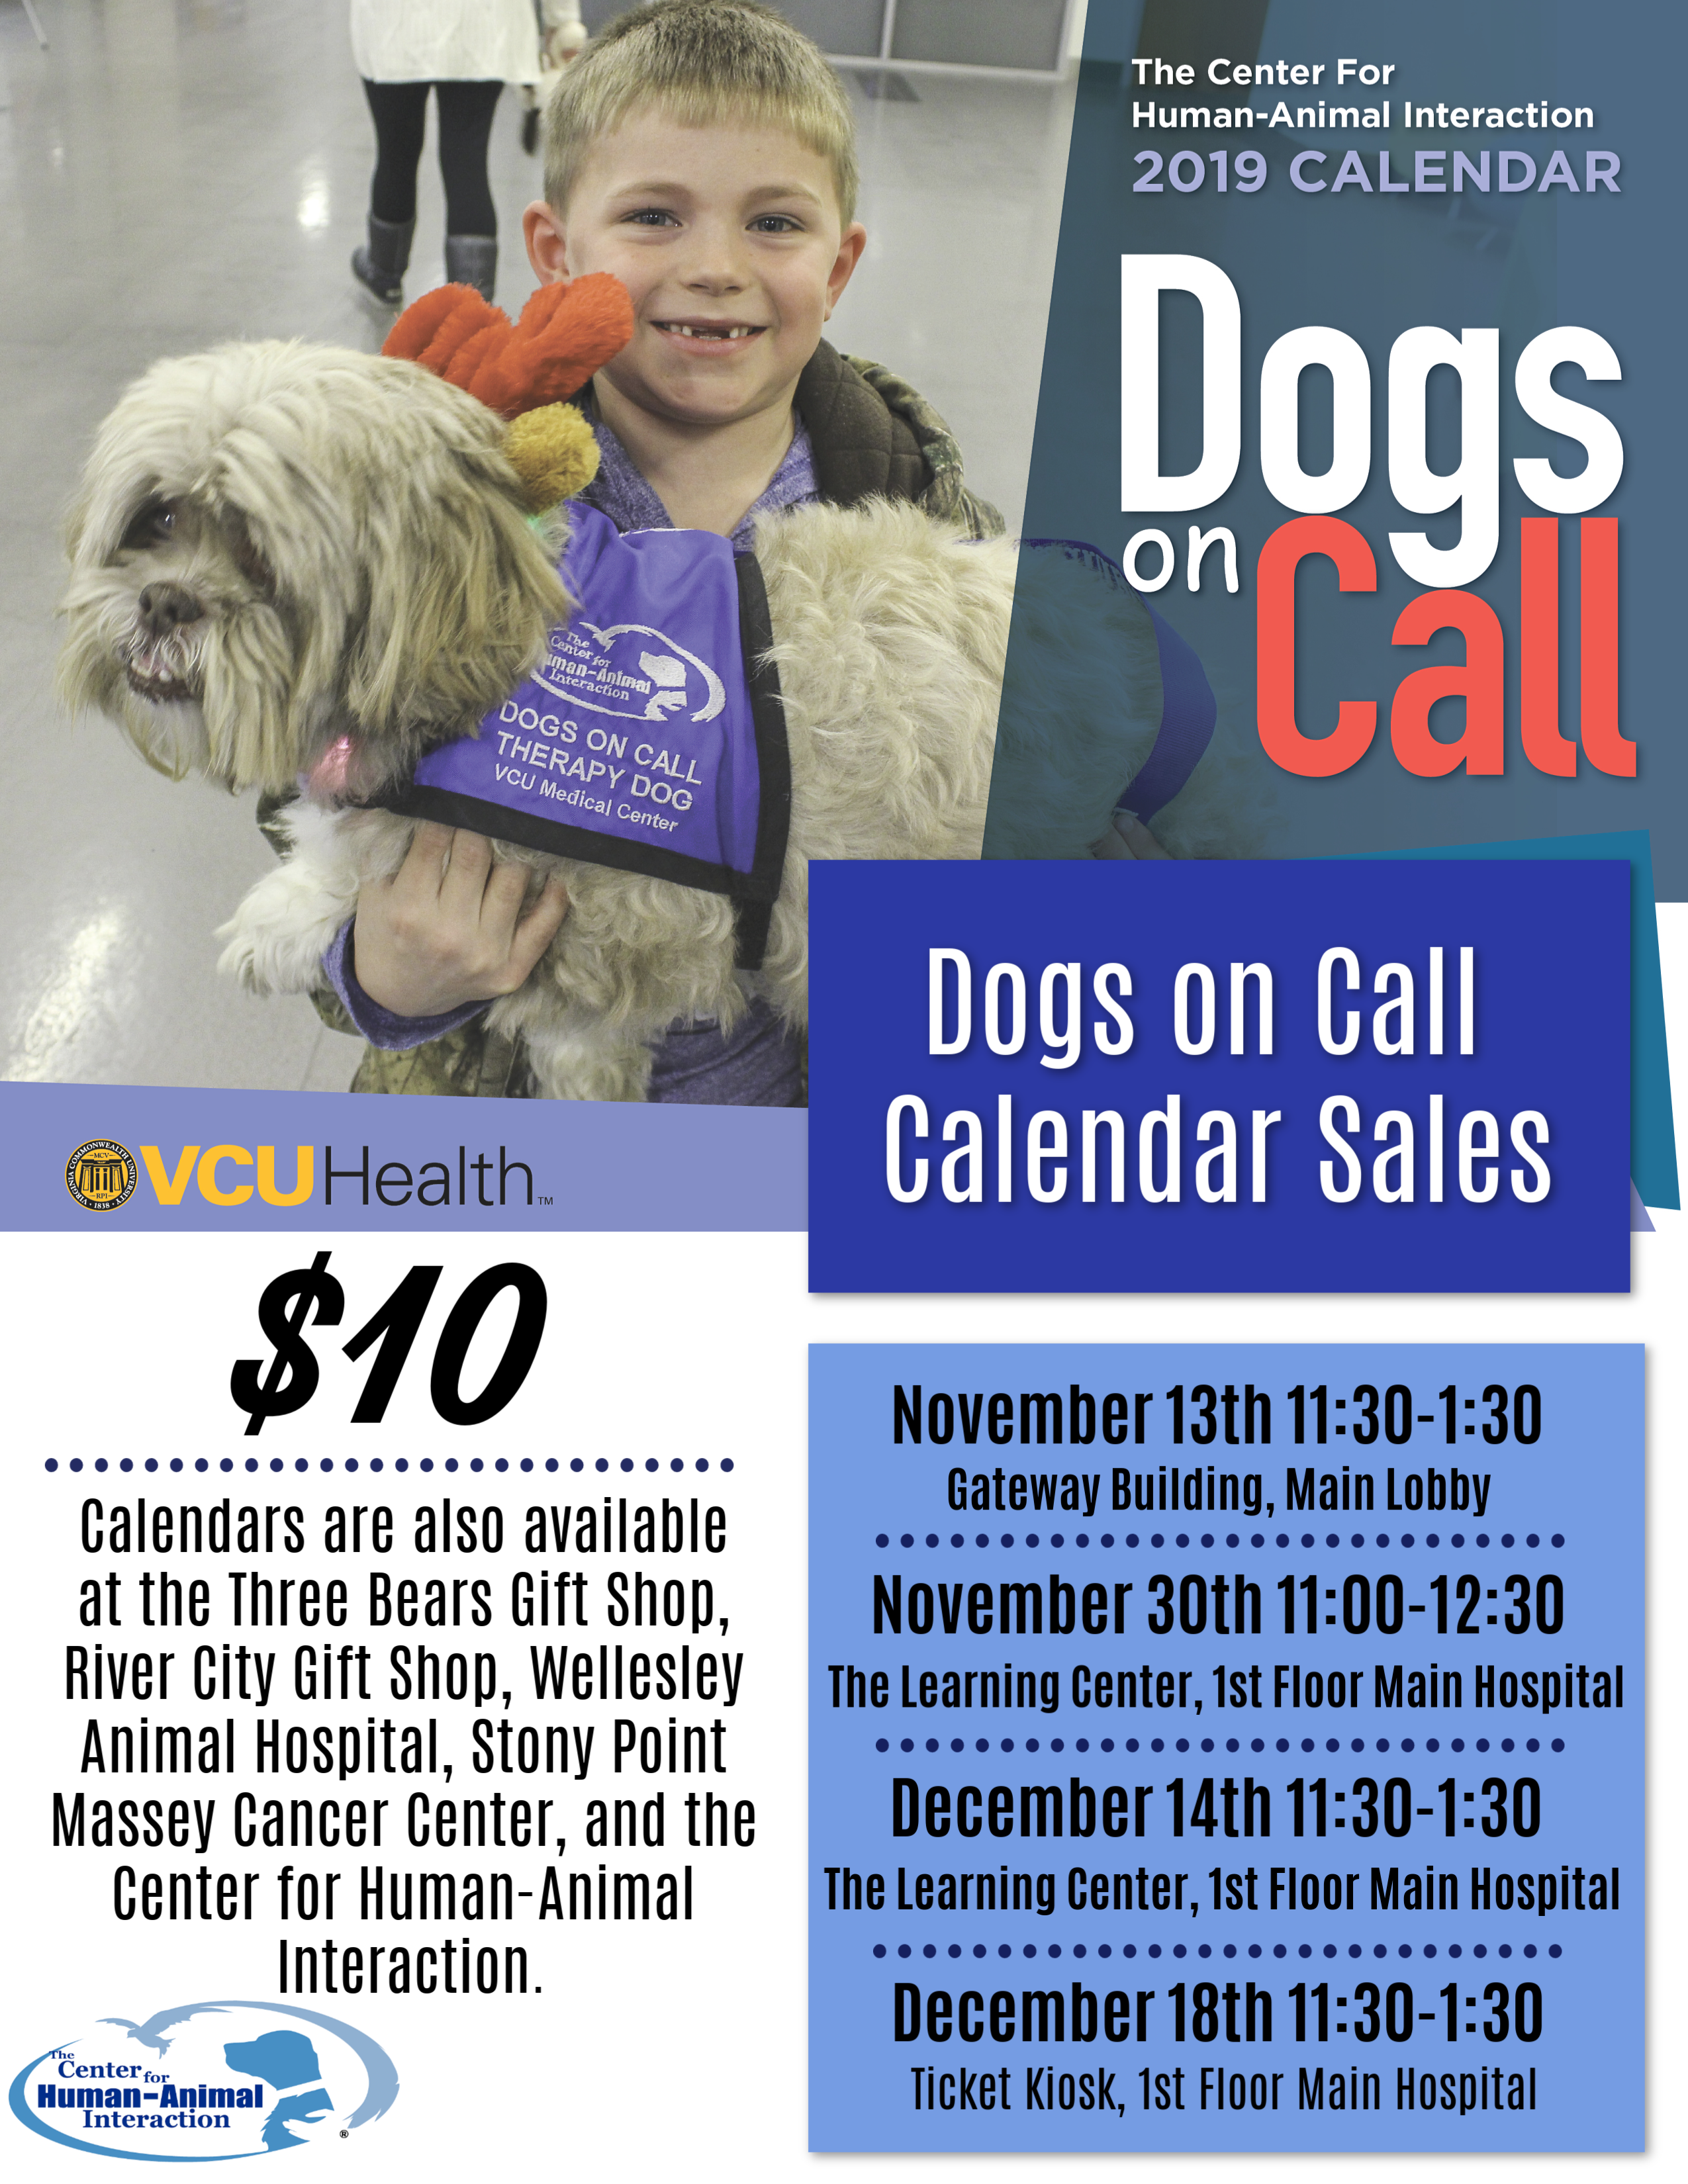 Flyer that includes a photo of the 2019 Dogs On Call Calendar which features Dogs On Call therapy dog Lucas, a lhasa apso and shih tzu mix with a gray coat, being held by a young smiling friend. Text below in post.